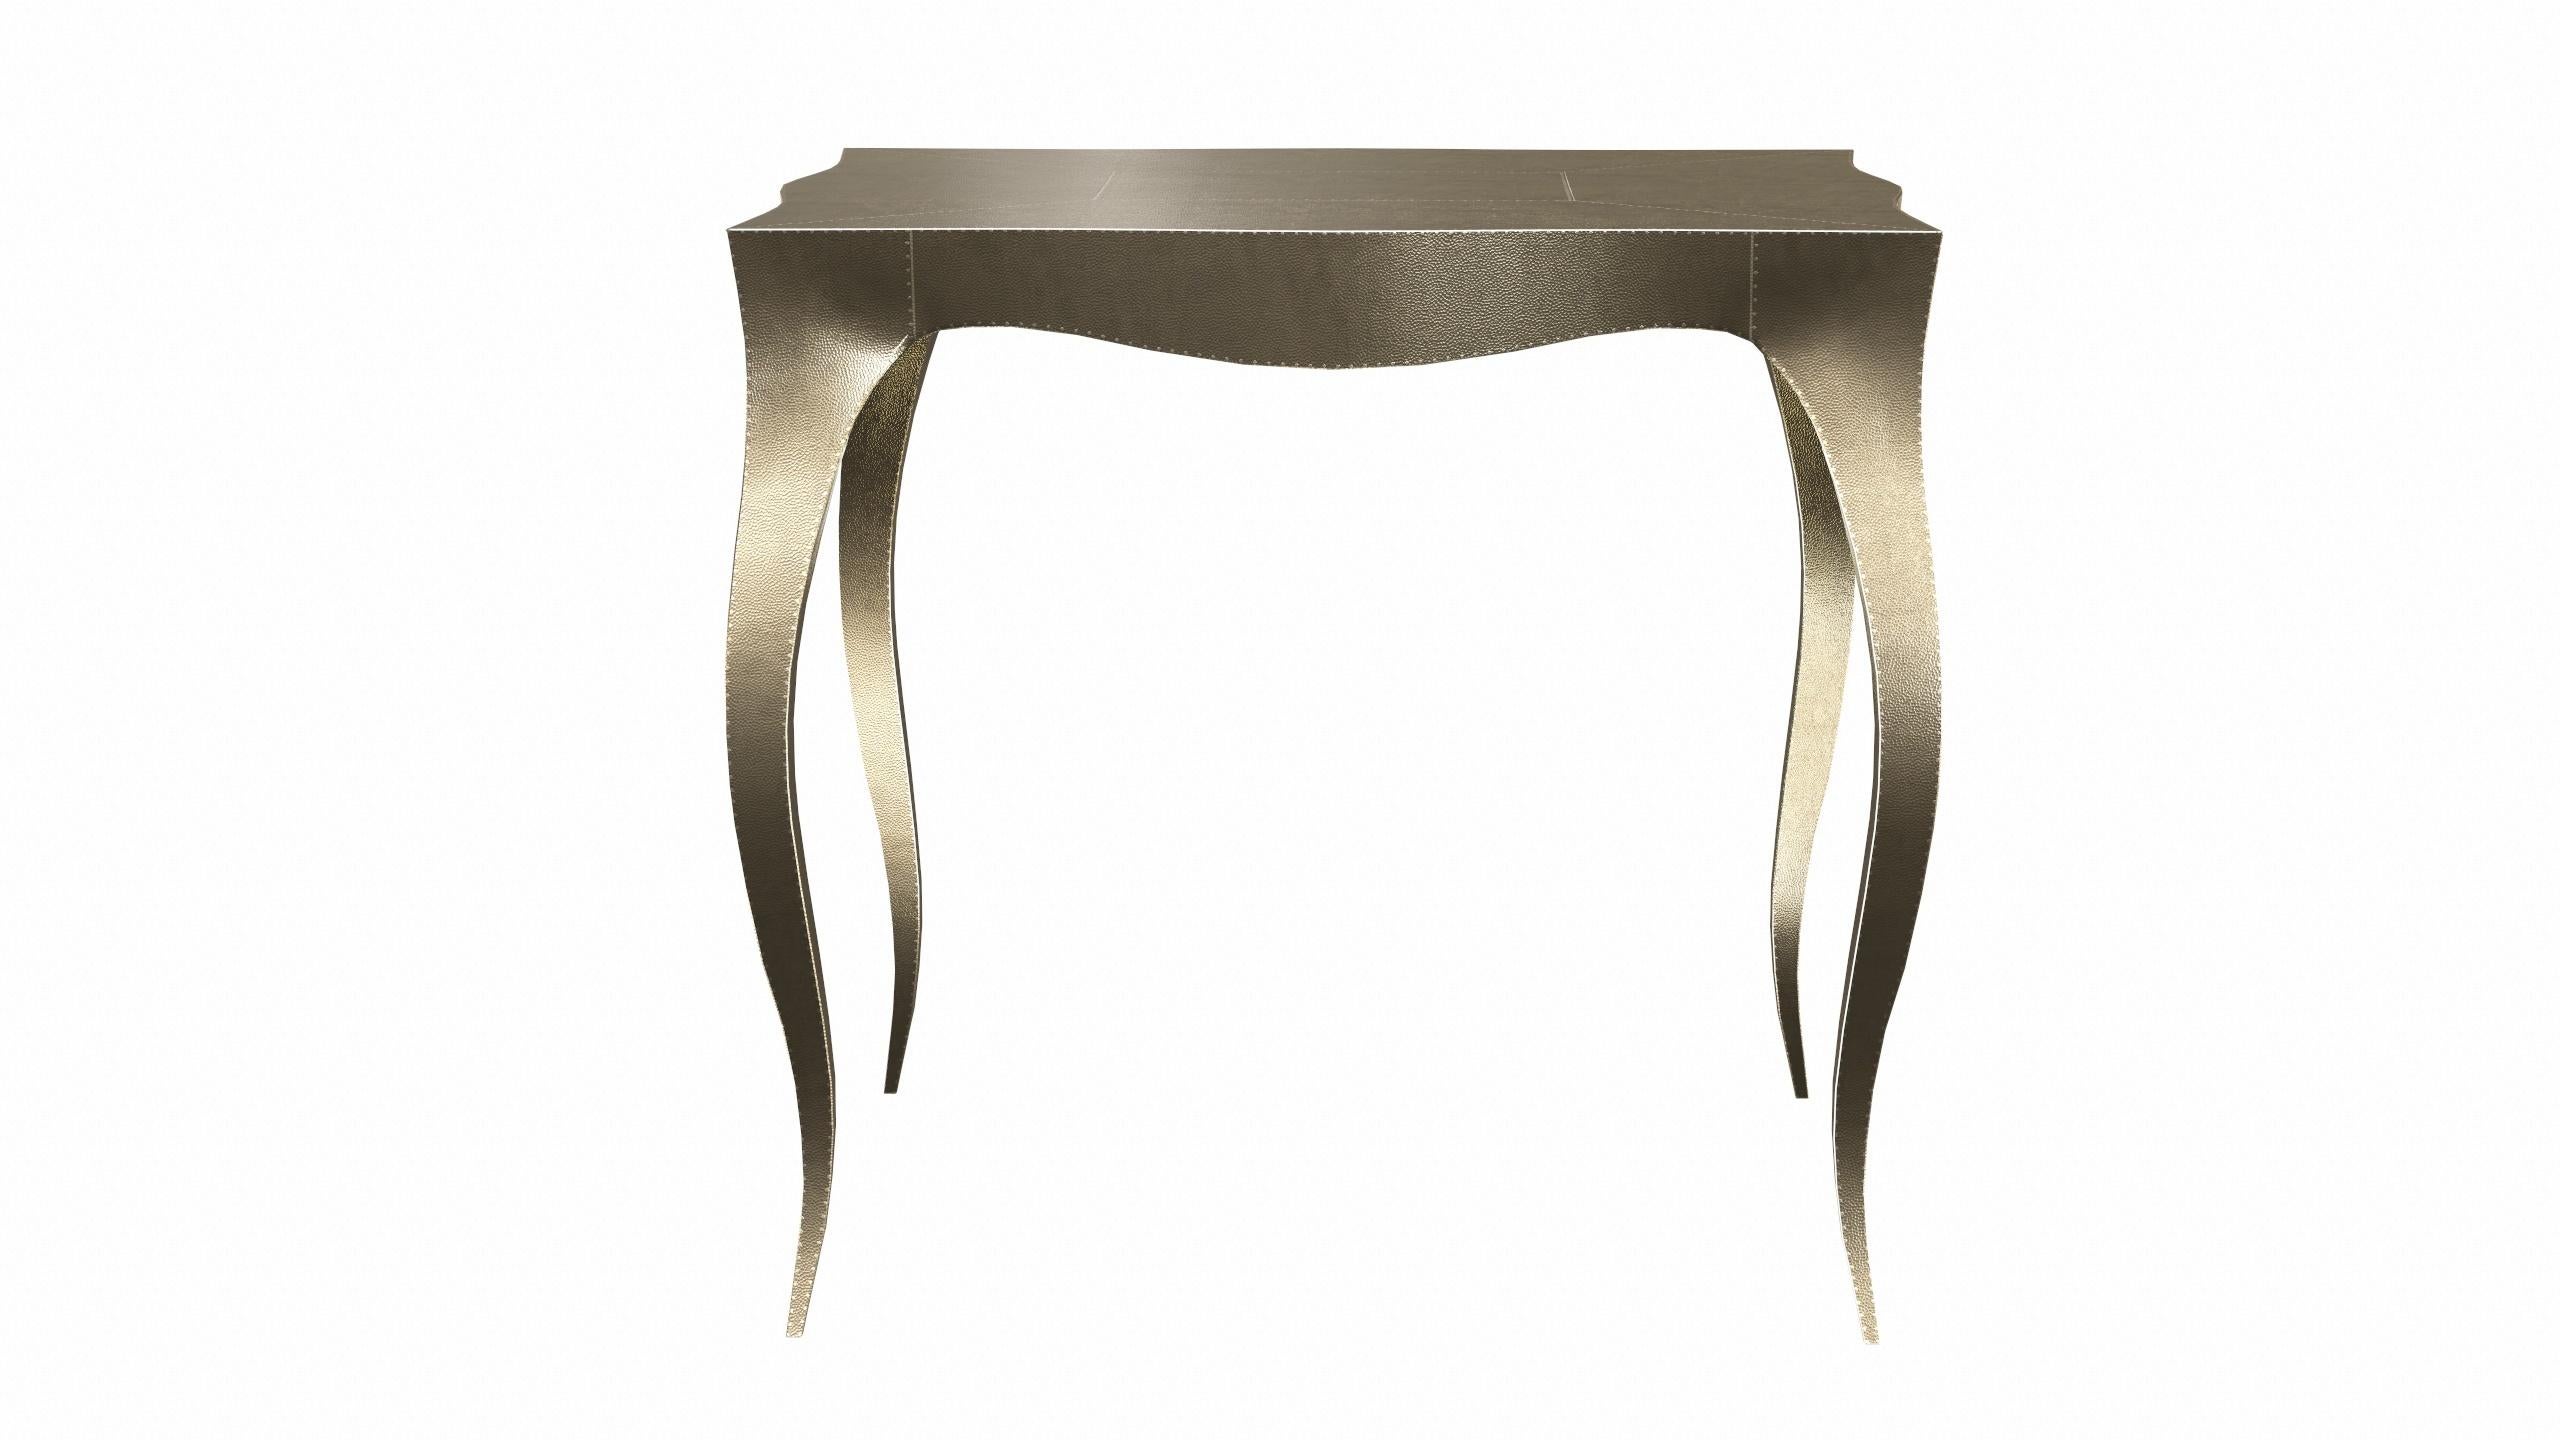 American Louise Art Deco Nesting and Stacking Tables Mid. Hammered Brass by Paul Mathieu For Sale